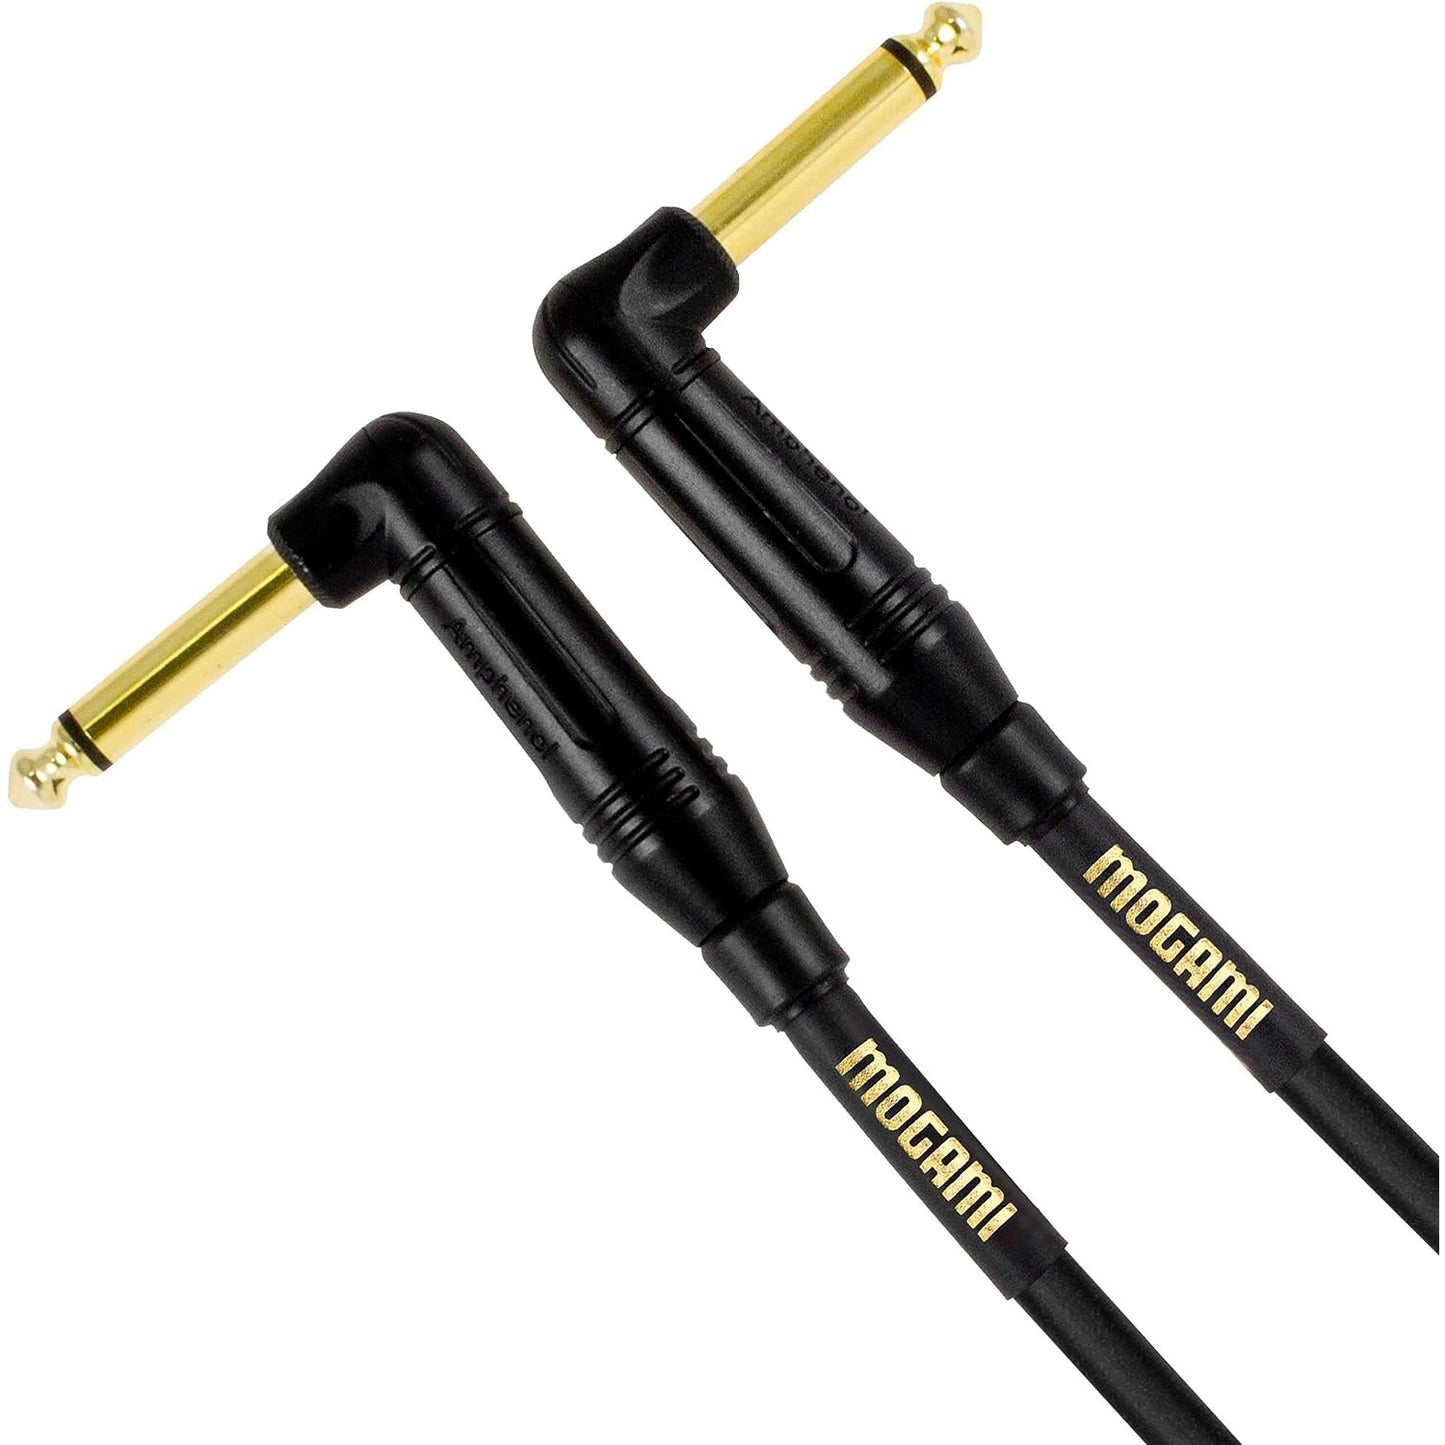 Mogami Gold Instrument-0.5RR Guitar Pedal Effects Instrument Cable, 6 Inch